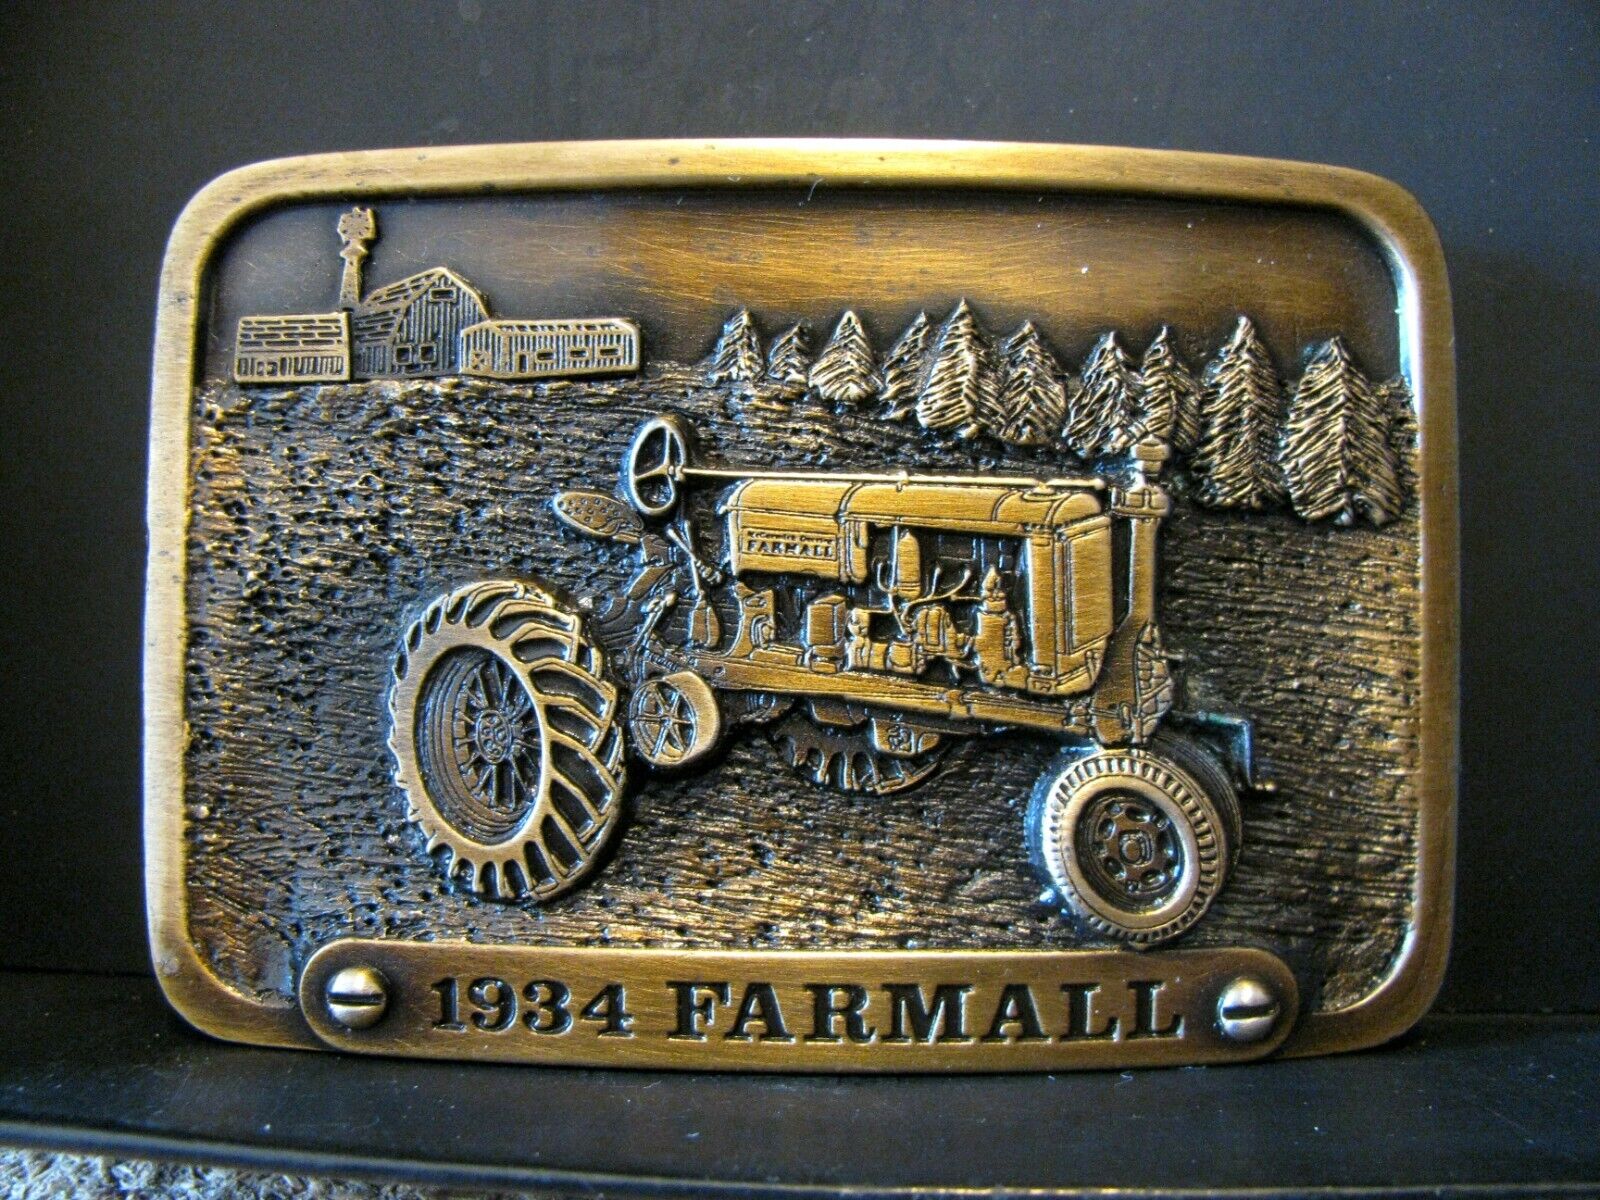 1934 Farmall IH F30 Tractor Brass Belt Buckle Spec Cast Limited Edition 250 Made